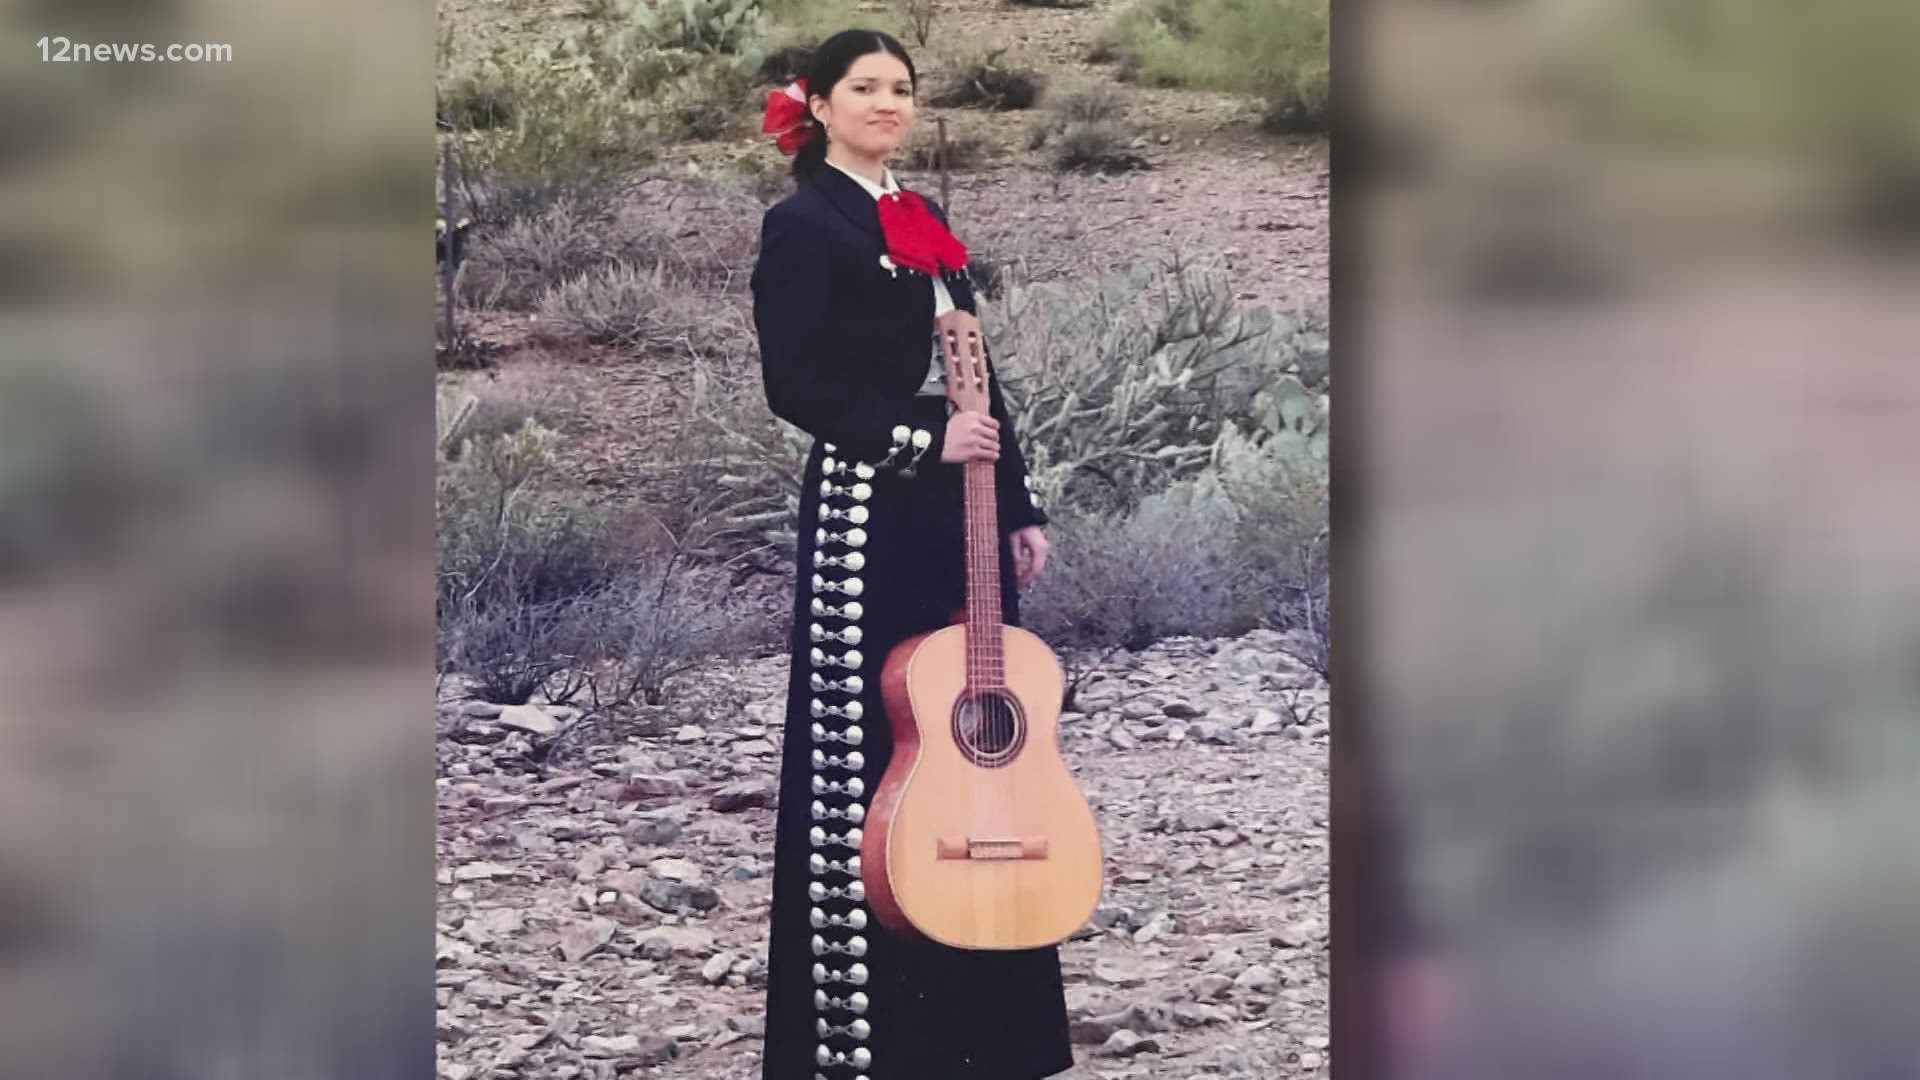 Tatiana Pena's Mariachi roots stem from her dad. He came to the U.S from Honduras in the '70s to study the violin at ASU.